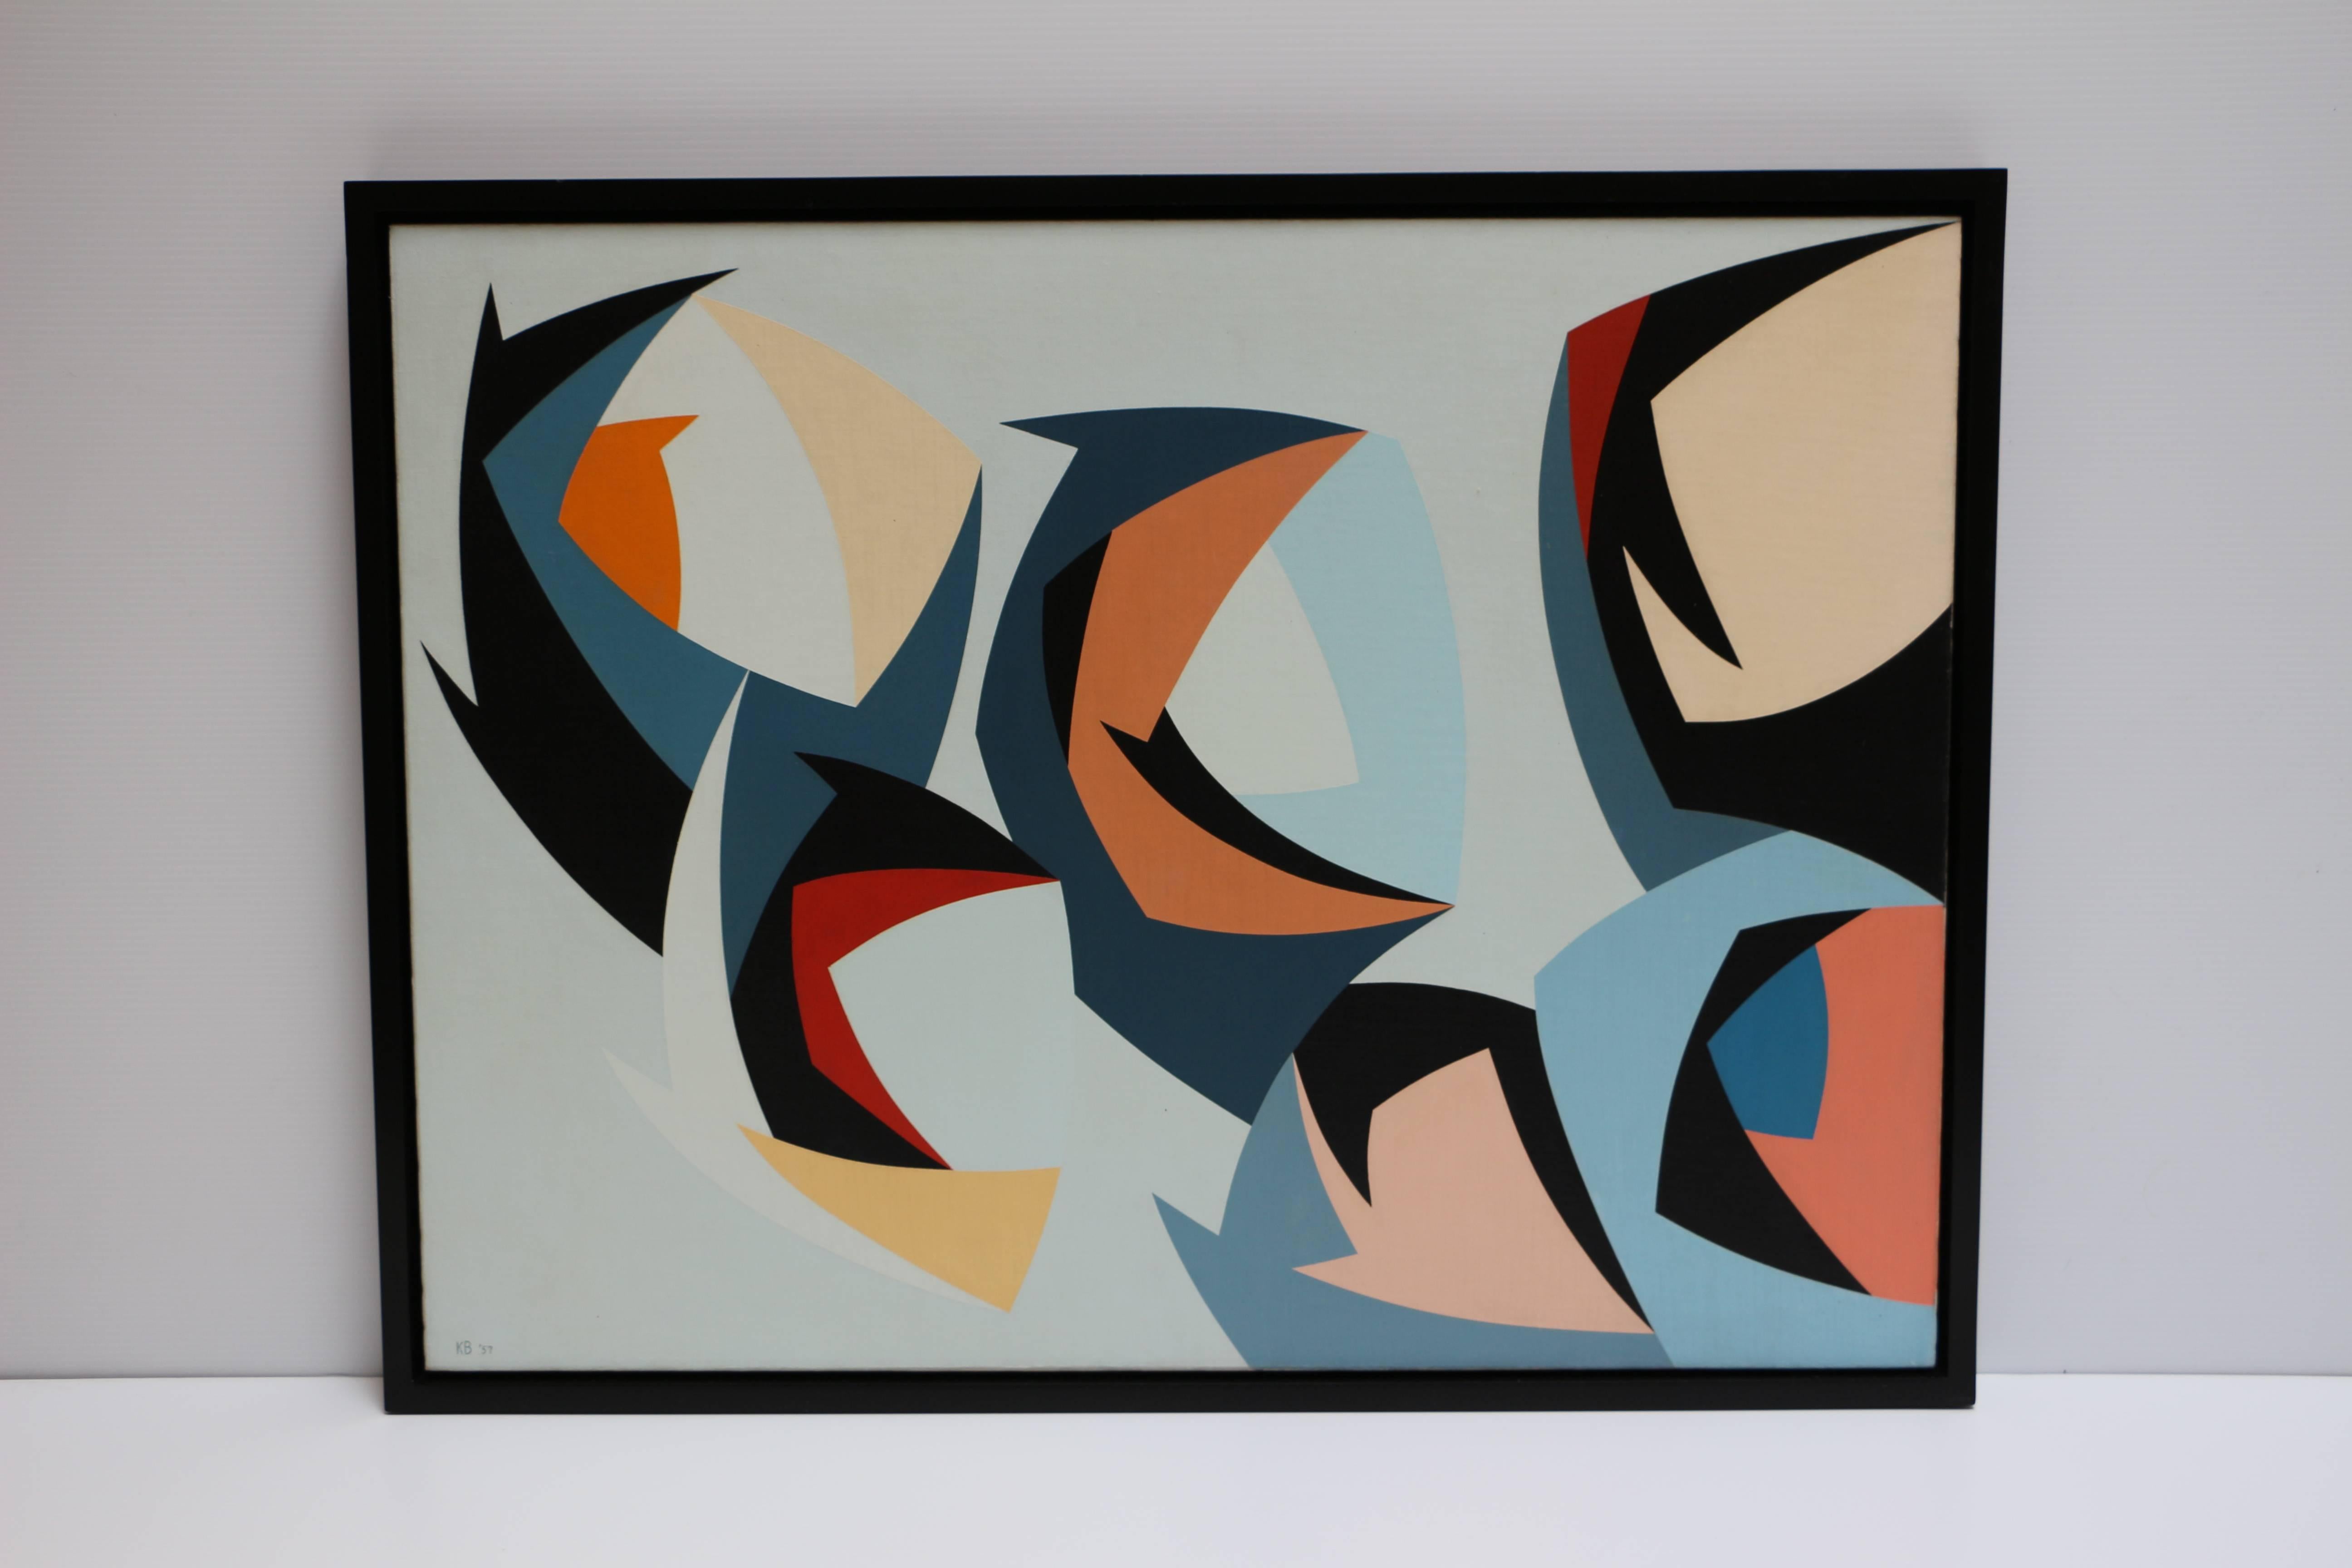 Dissected Spheres, abstract geometric color forms on a light blue background - Painting by Karl Benjamin